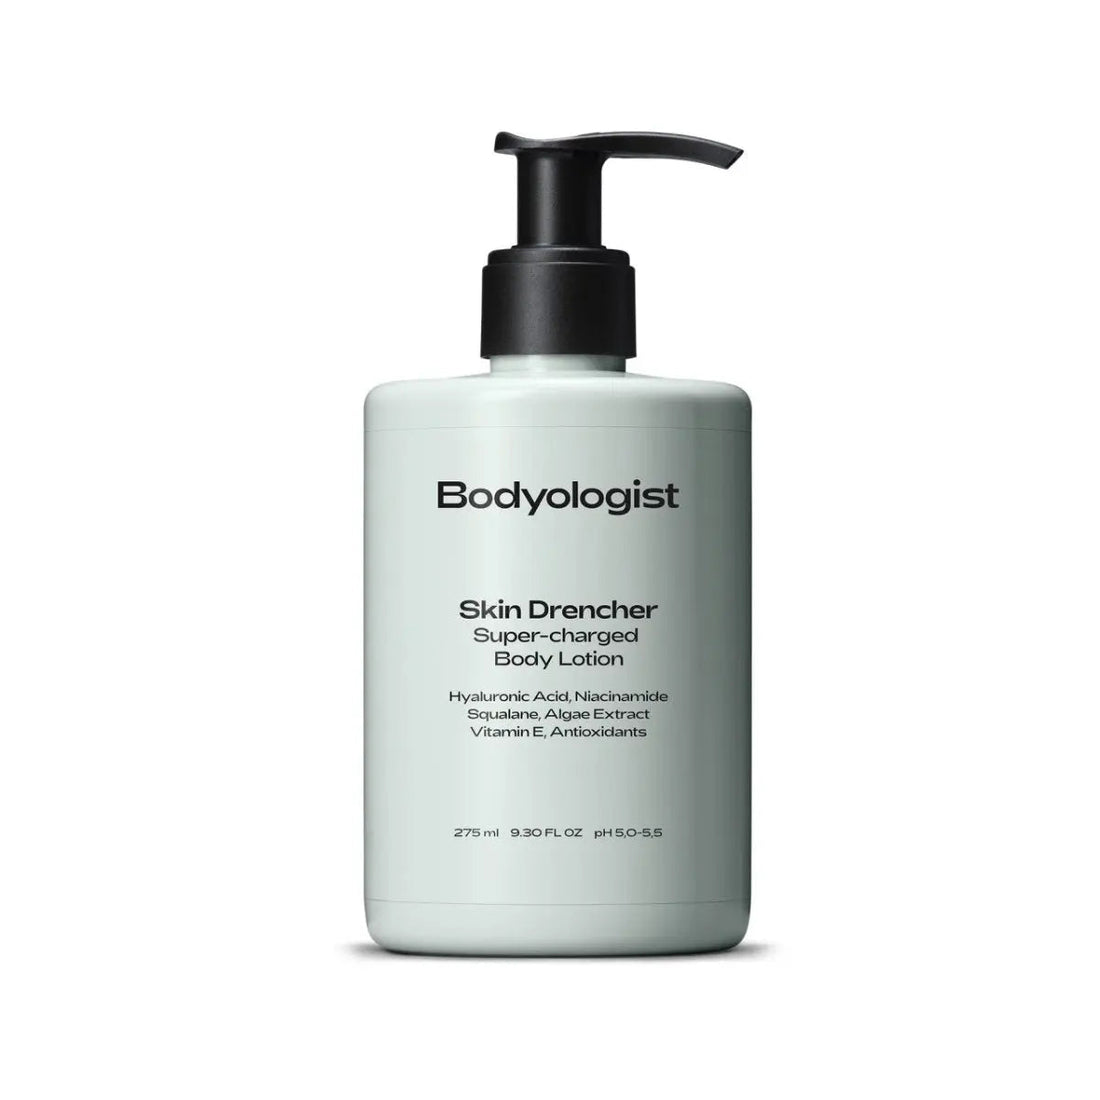 Bodyologist Skin Drencher Super Charged Body Lotion